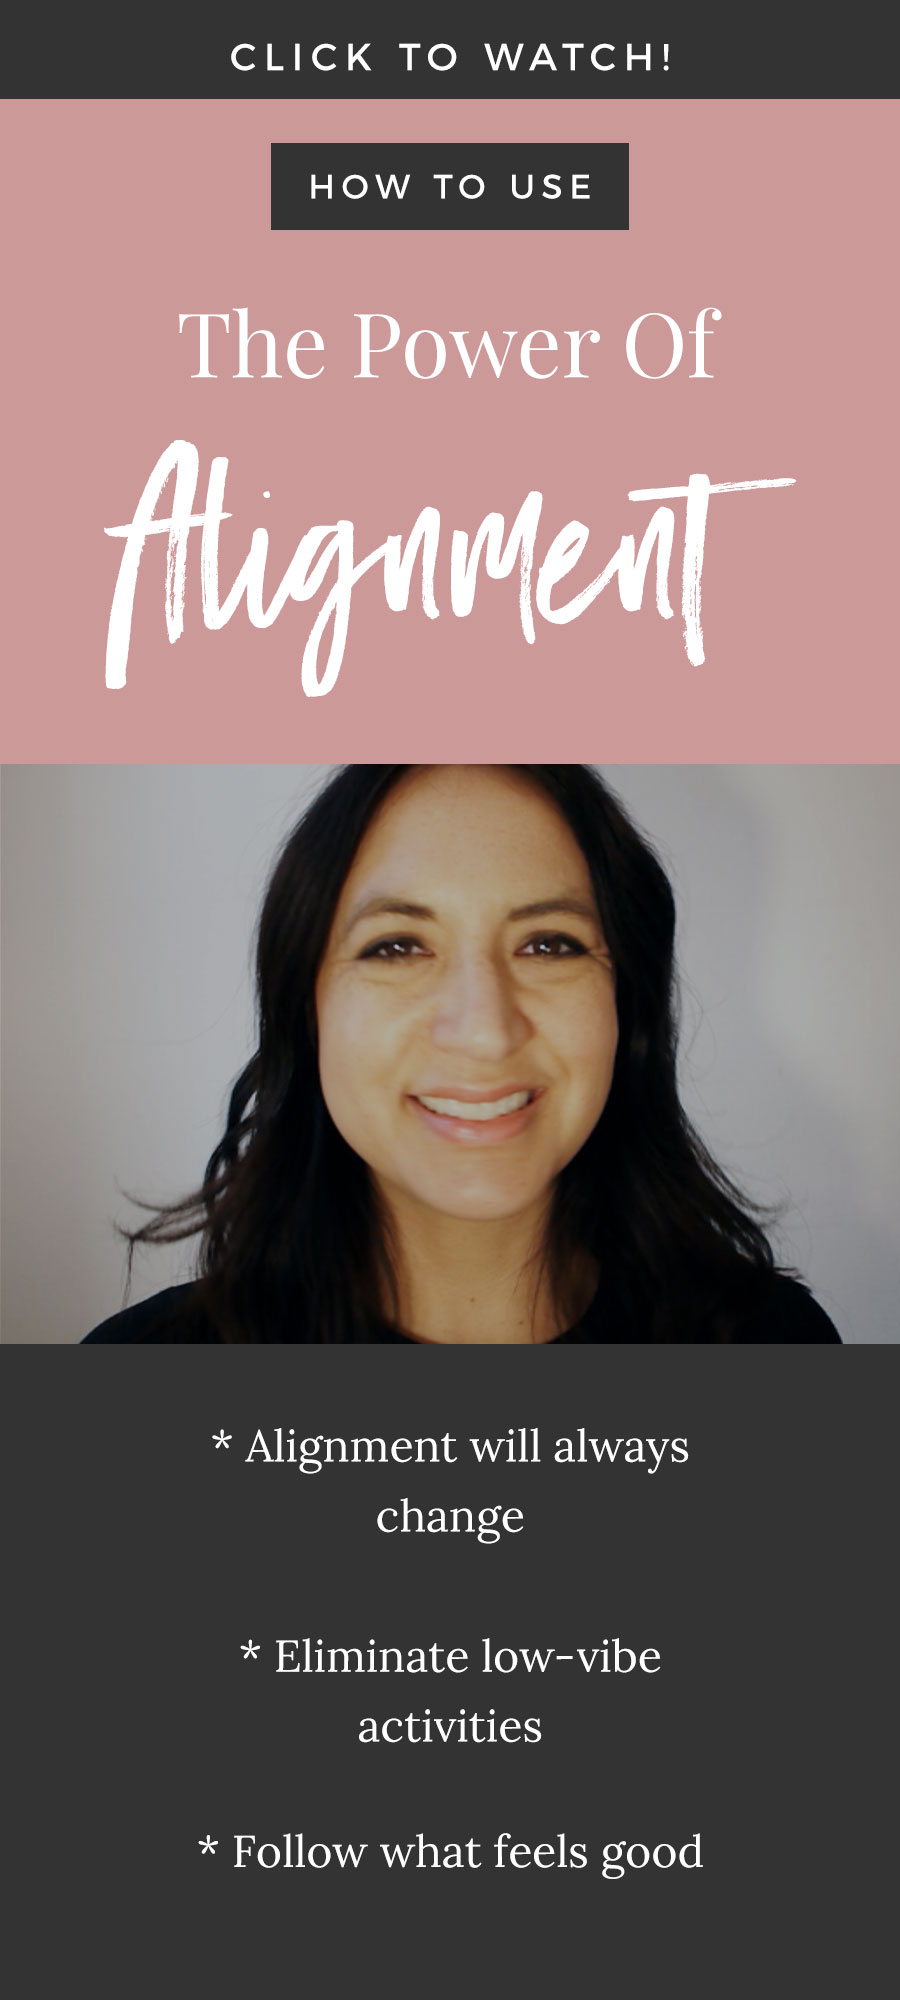 The Power Of Alignment